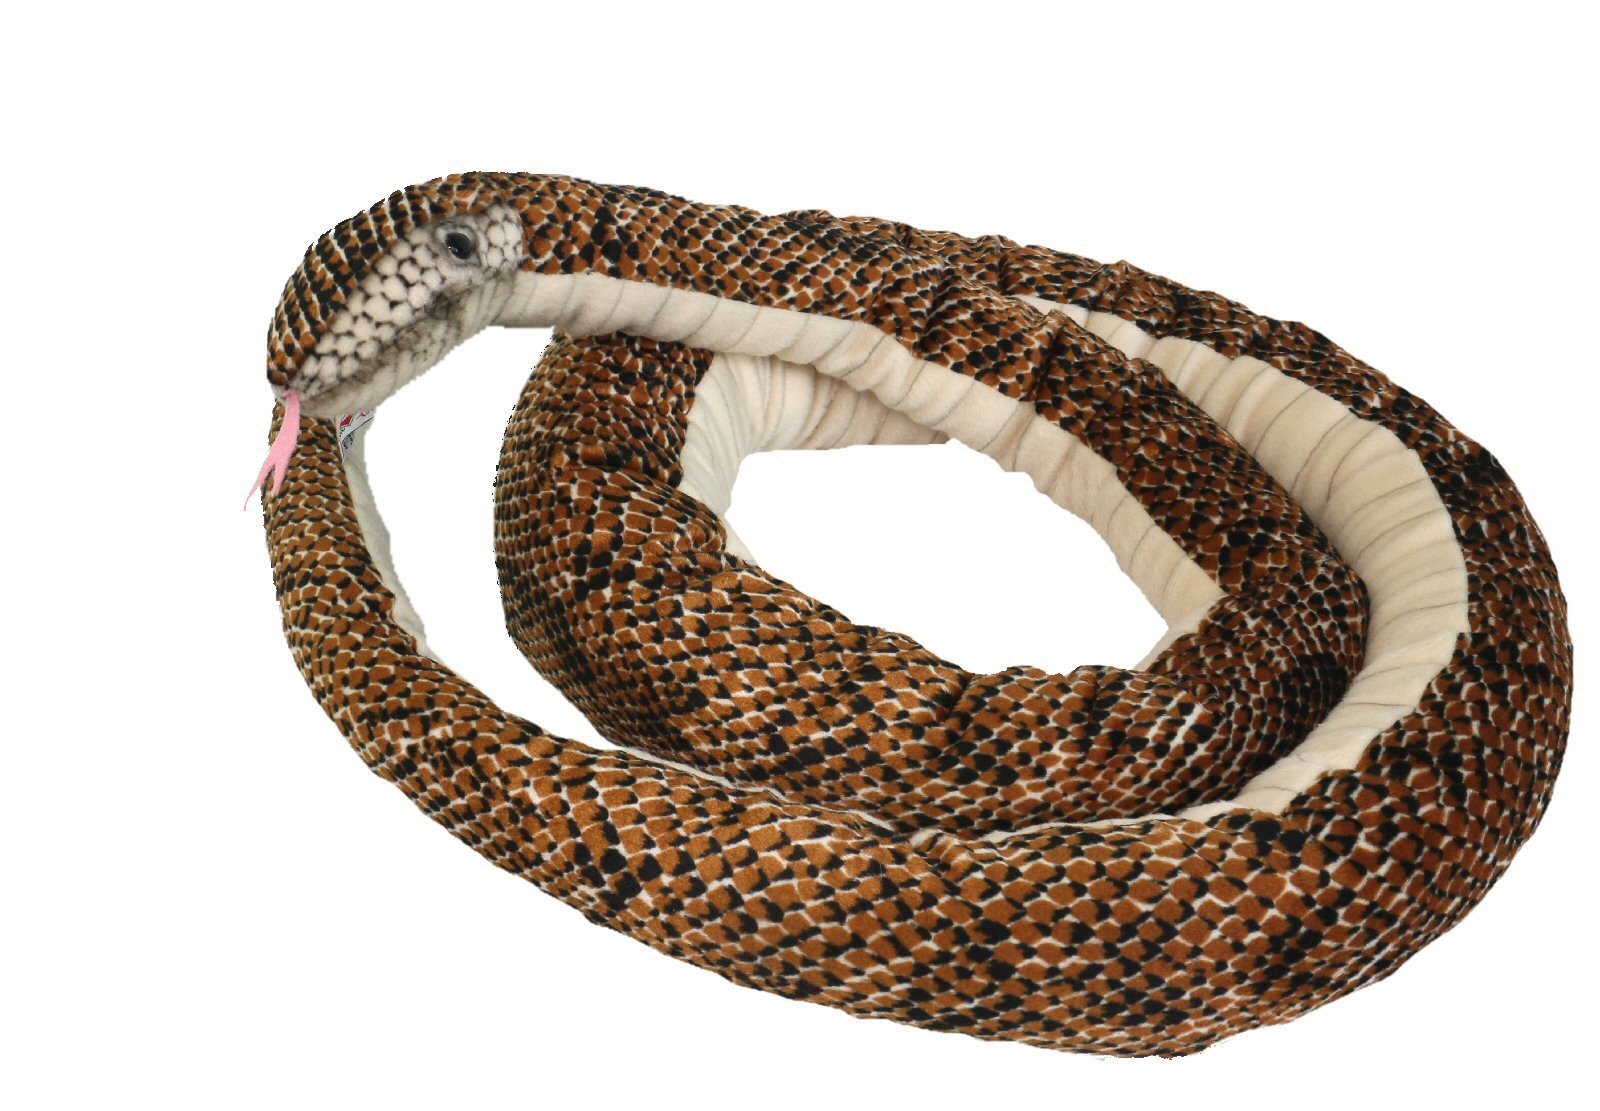 bowa constrictor snake